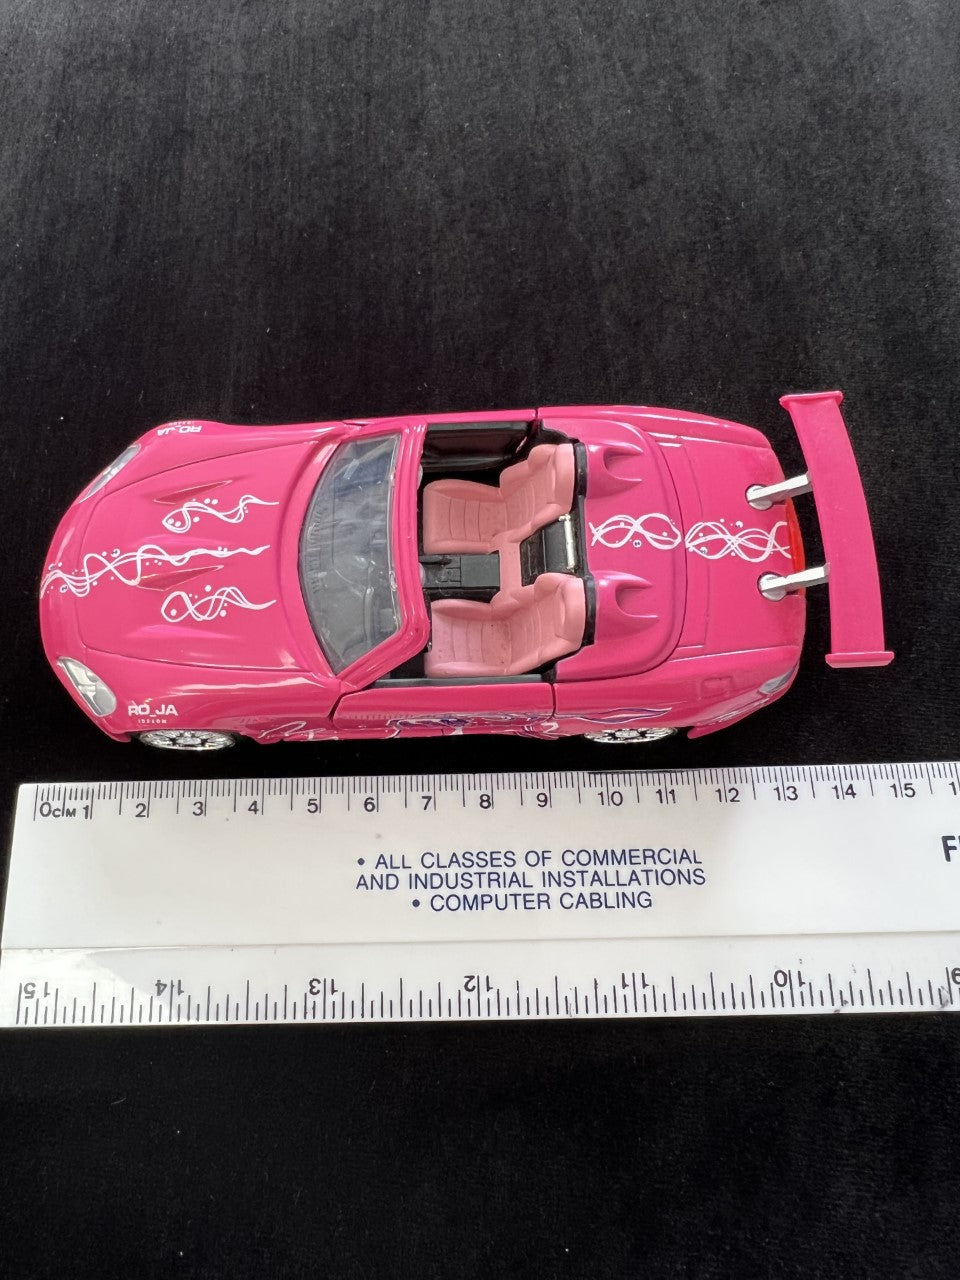 Collectible - Fast and Furious Suki's Honda S2000 diecast model road car PINK